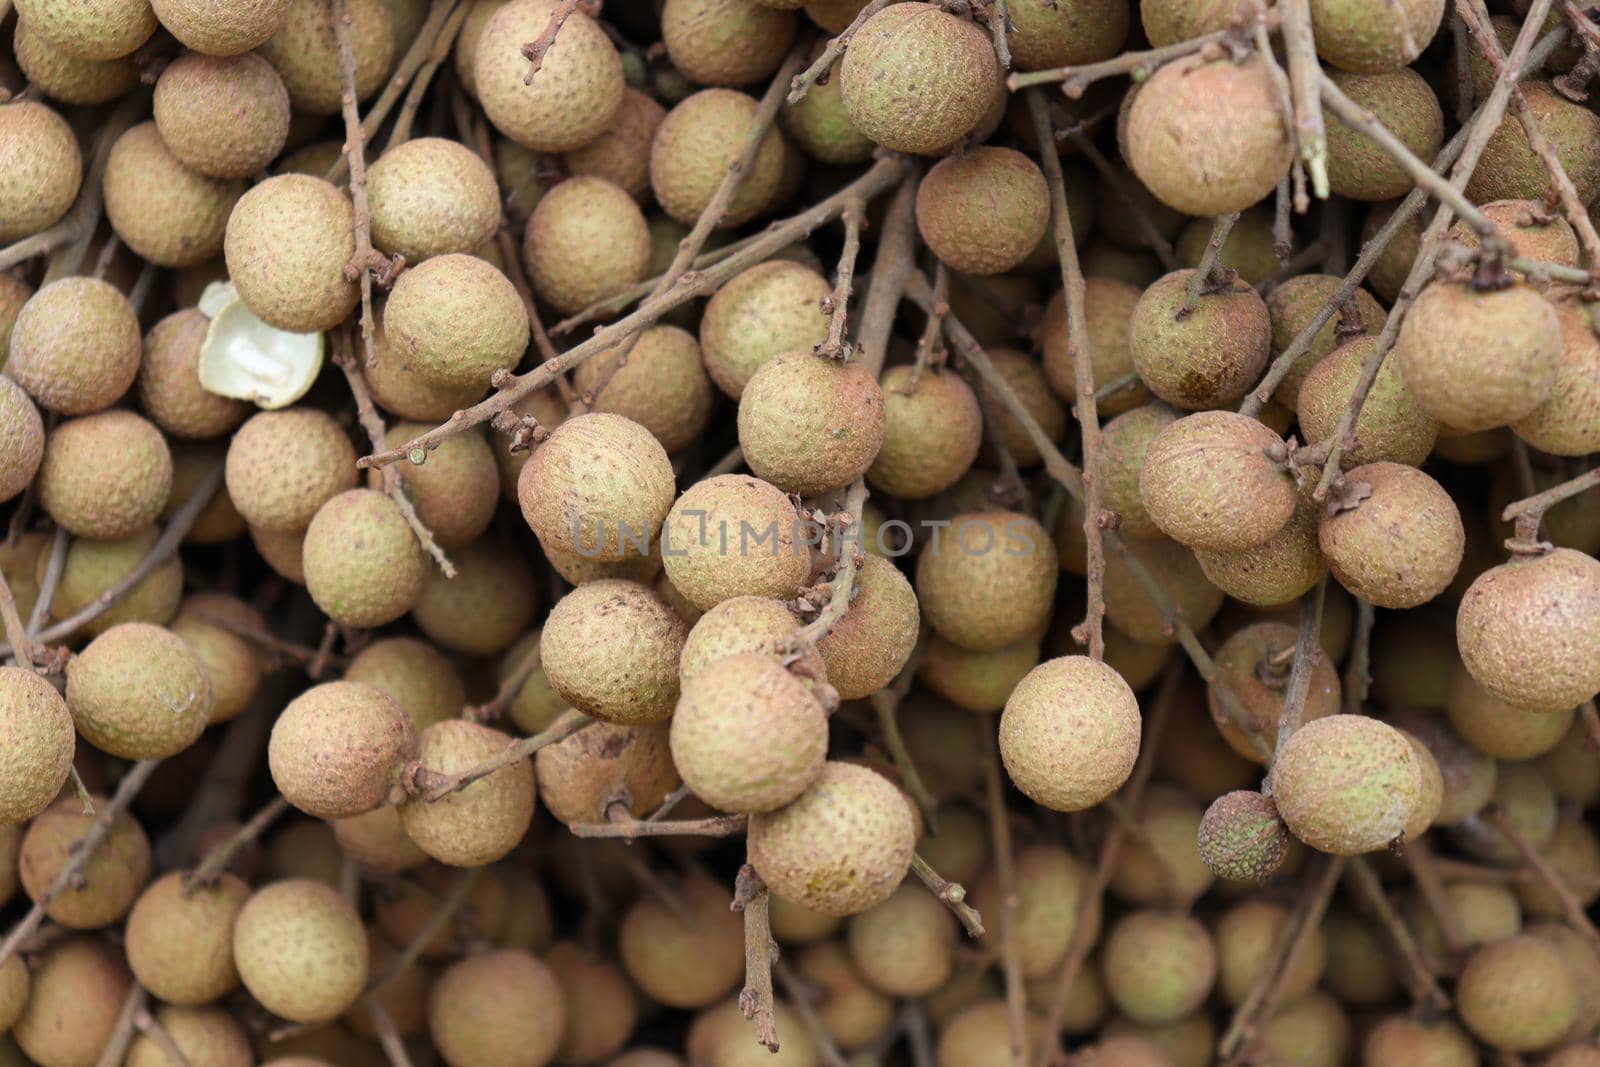 Longan Stock on shop for sell by jahidul2358